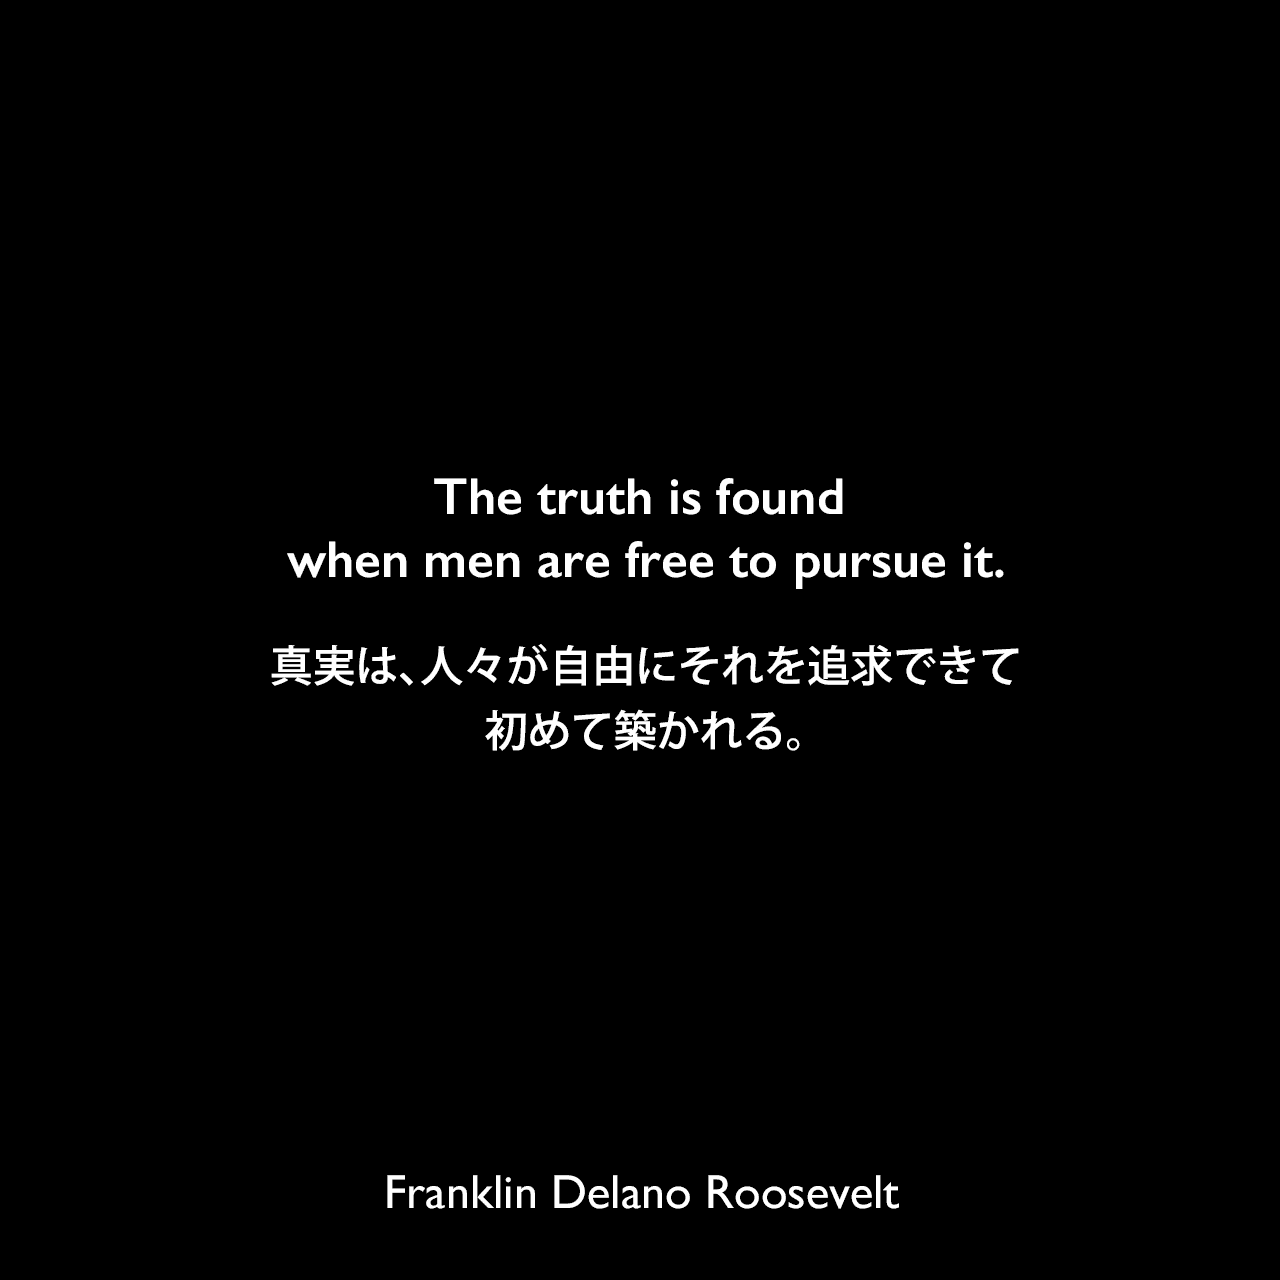 The truth is found when men are free to pursue it.真実は、人々が自由にそれを追求できて、初めて築かれる。Franklin Delano Roosevelt